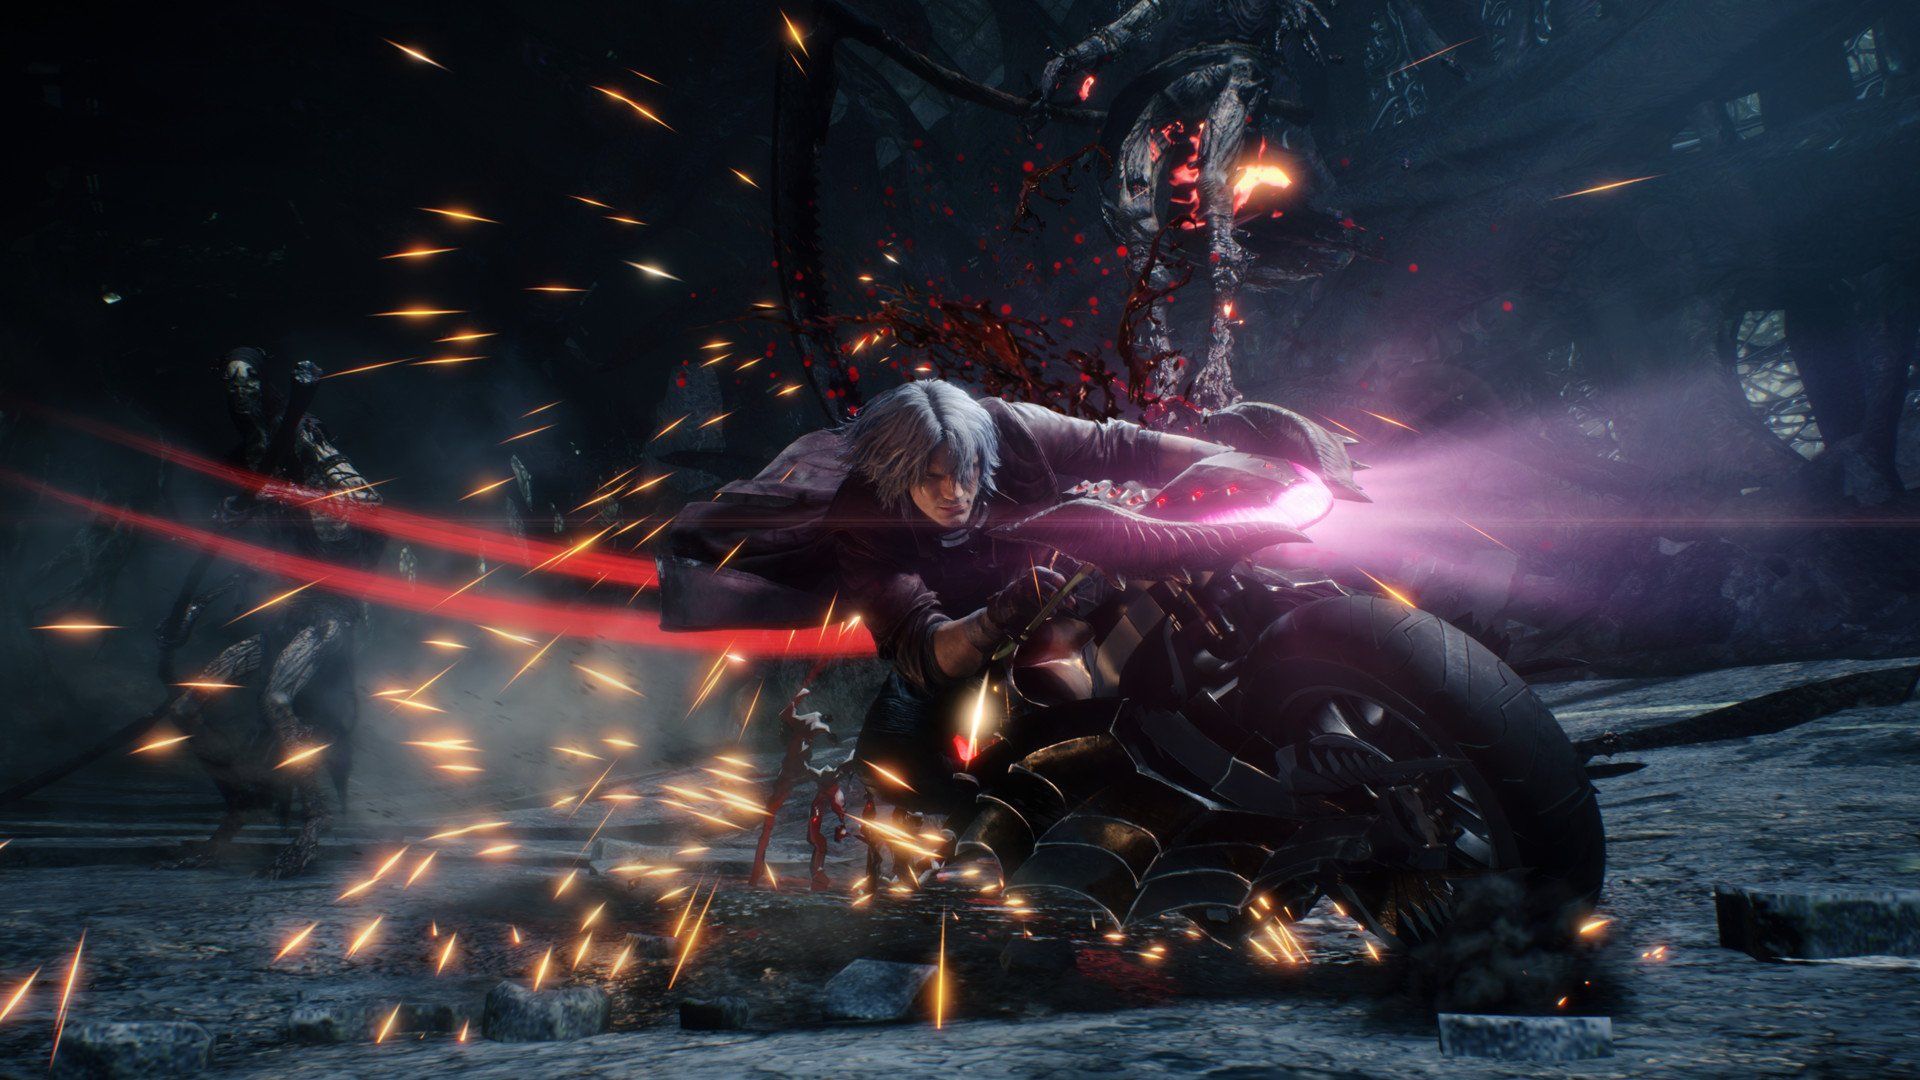 Devil May Cry 5: Special Edition Isn't Coming To PC Because It's Been 'optimized' For Next Gen Consoles